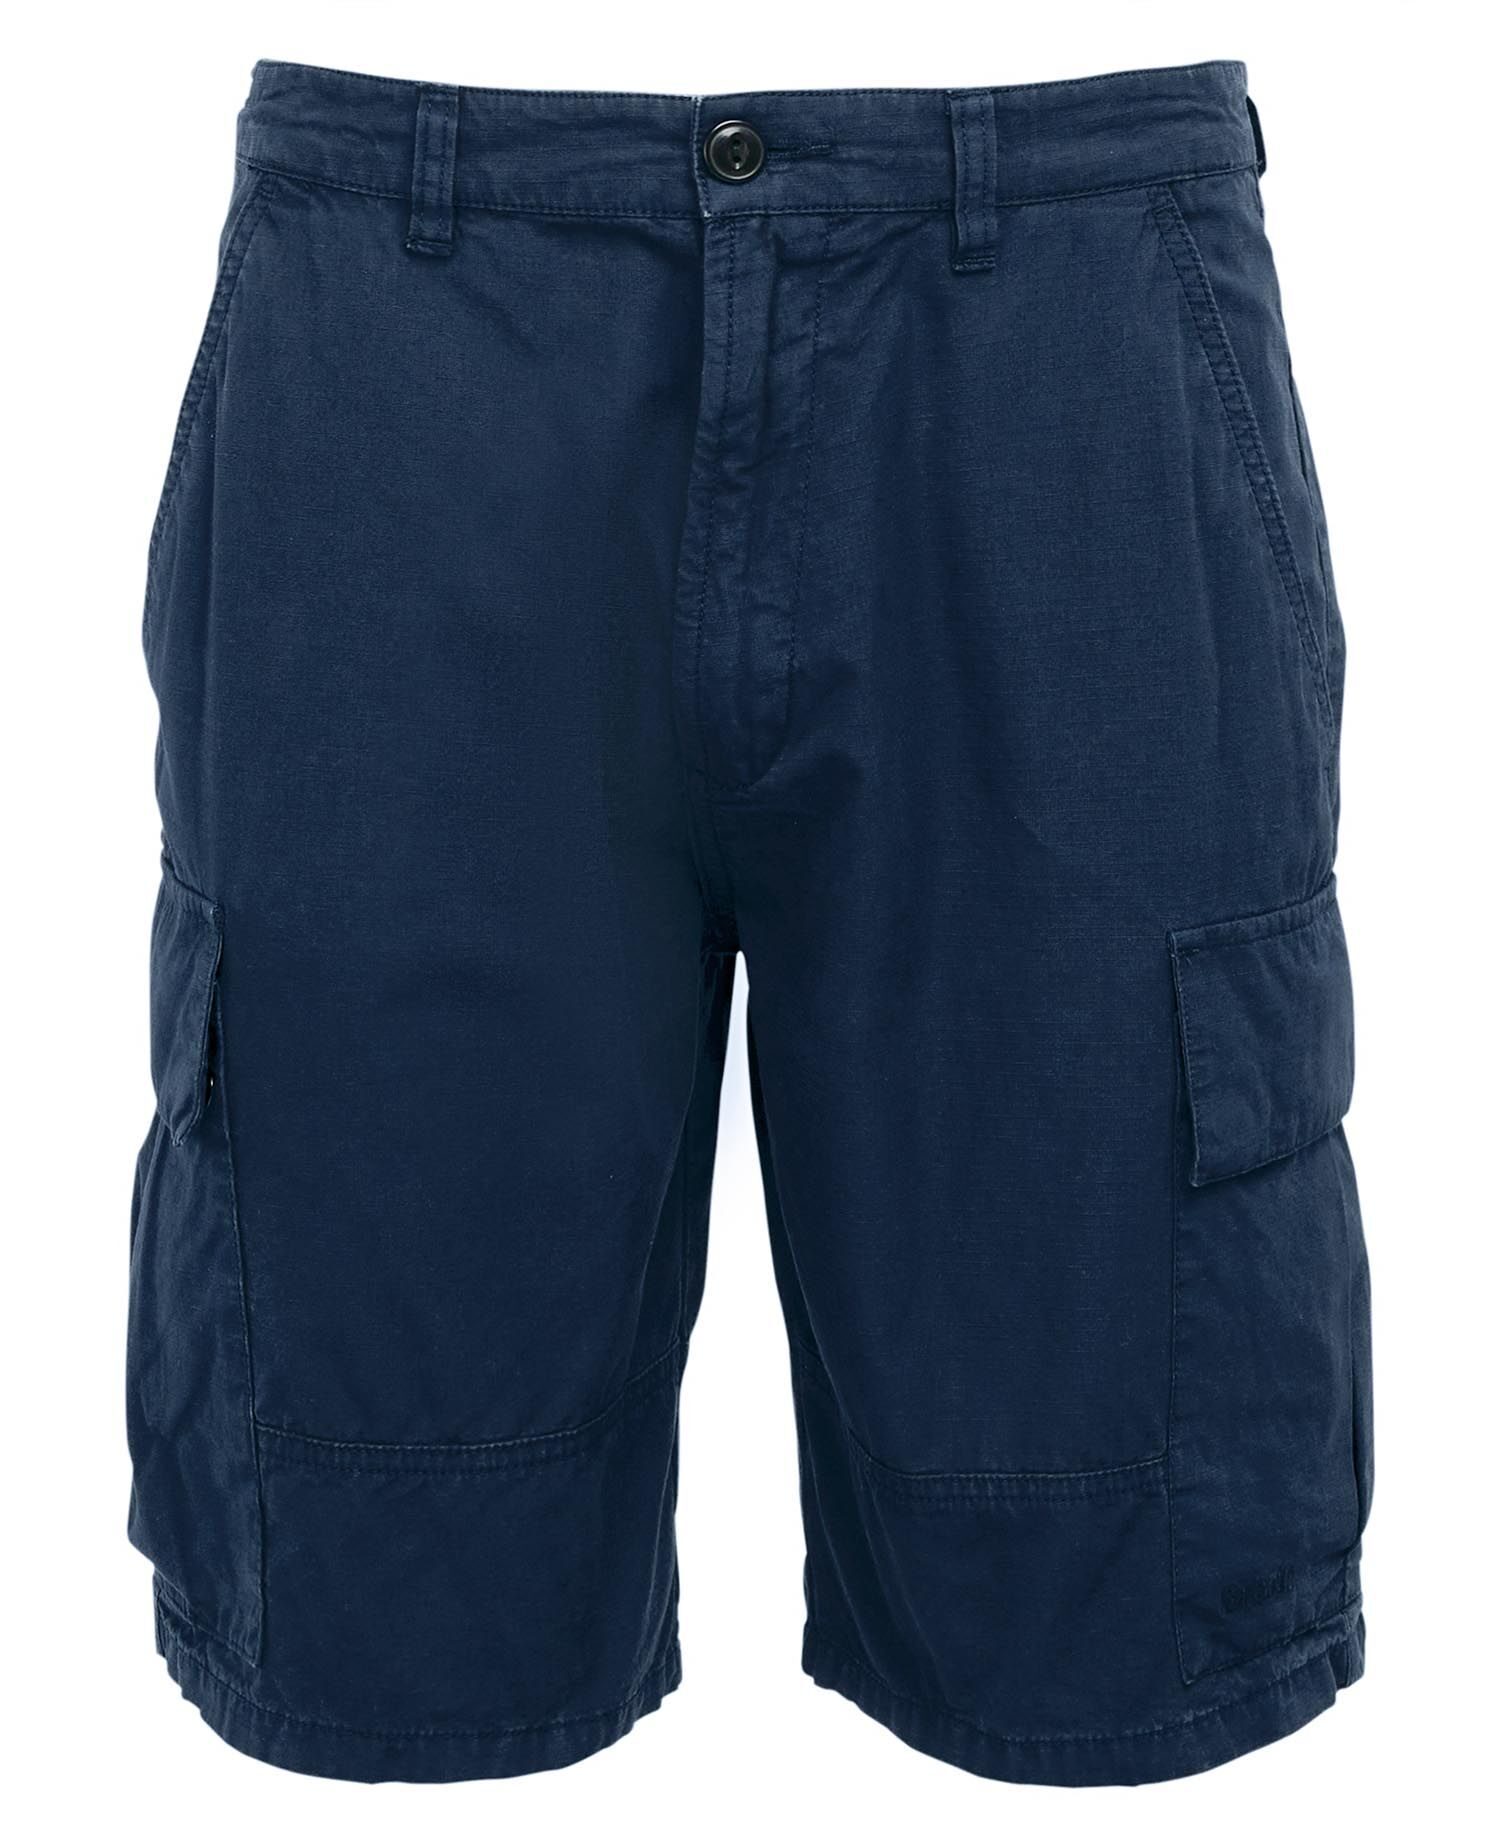 Essential Ripstop Cargo Shorts – Classic Navy